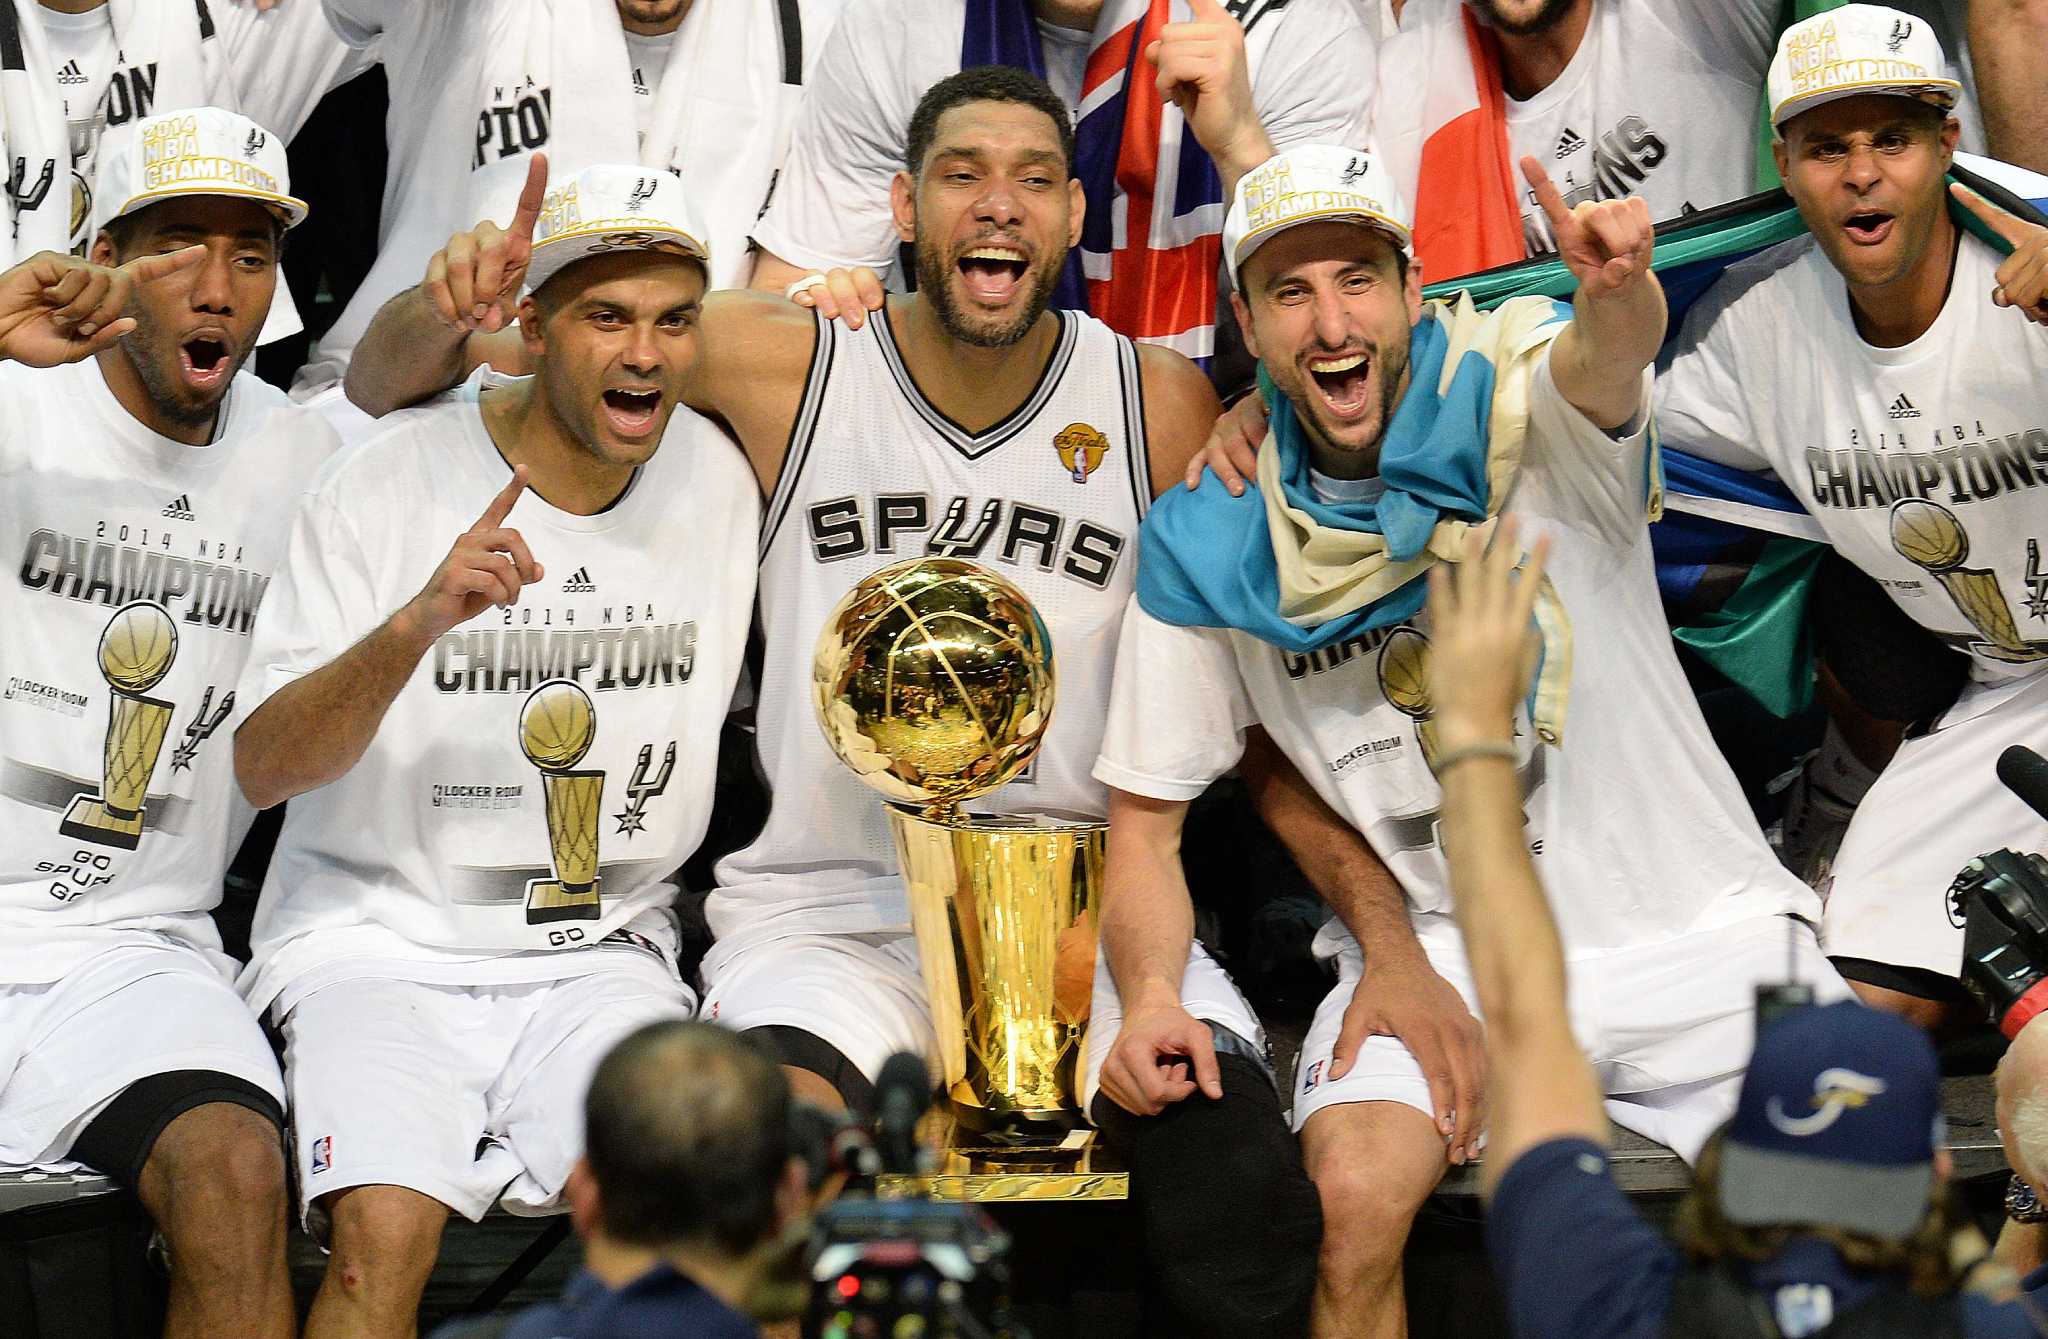 Tim Duncan, Tony Parker and Manu Ginobili and other Spurs players celebrating after winning the 2014 NBA FInals.